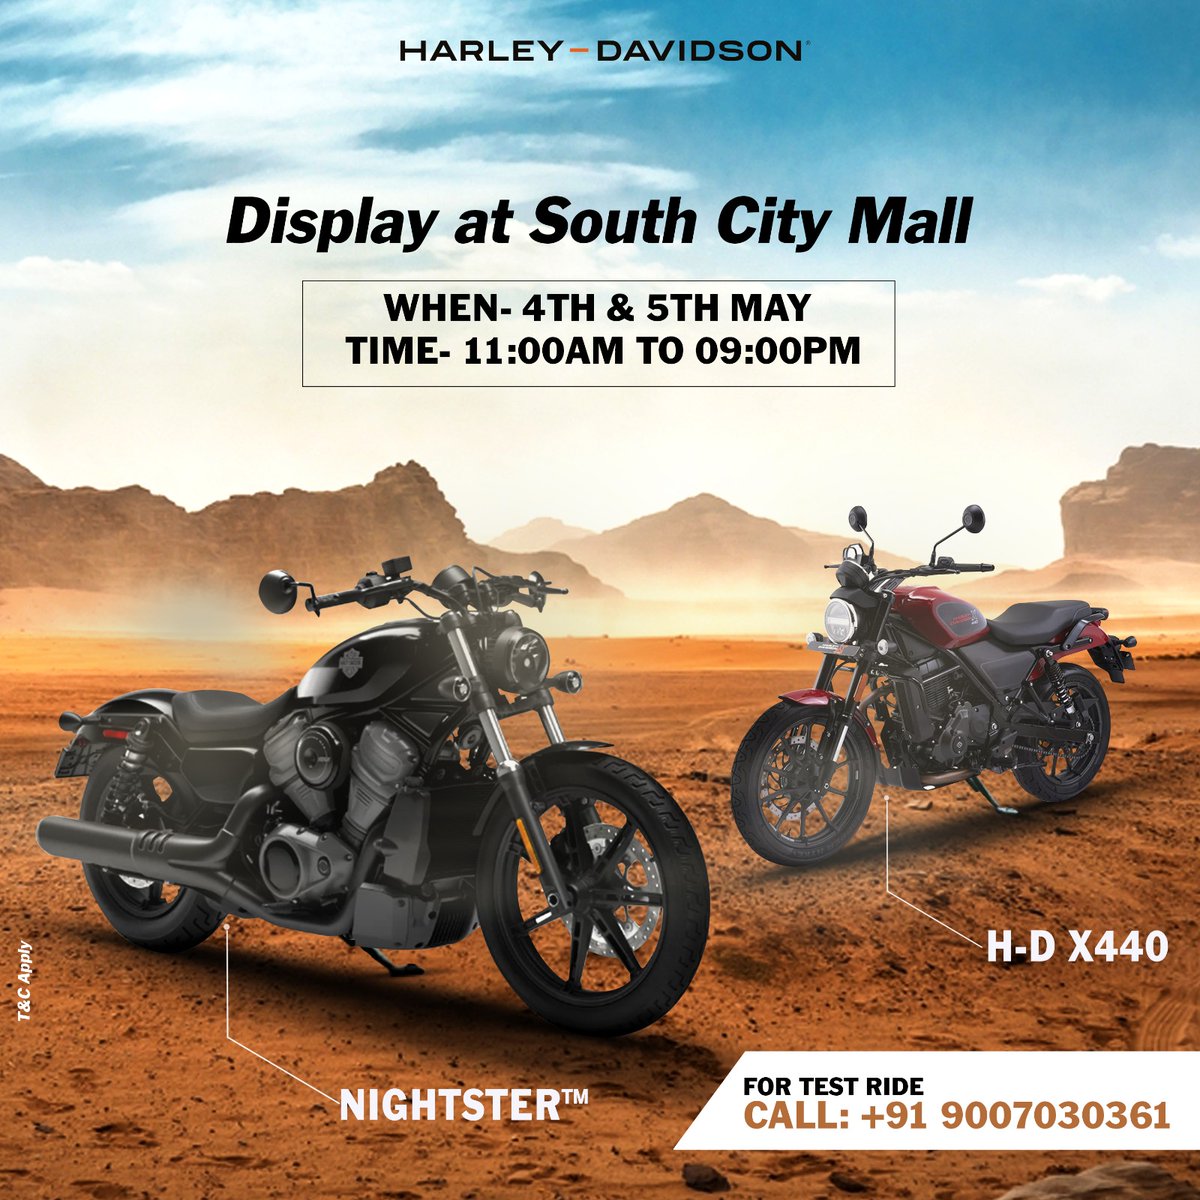 We will be at South City Mall.  
When- 4th & 5th May 
Time- 11:00AM to 09:00PM
For test ride, call +91 9007030361

Drop by if you're around!

#HarleyDavidson #BengalHarleyDavidson #SouthCityMall